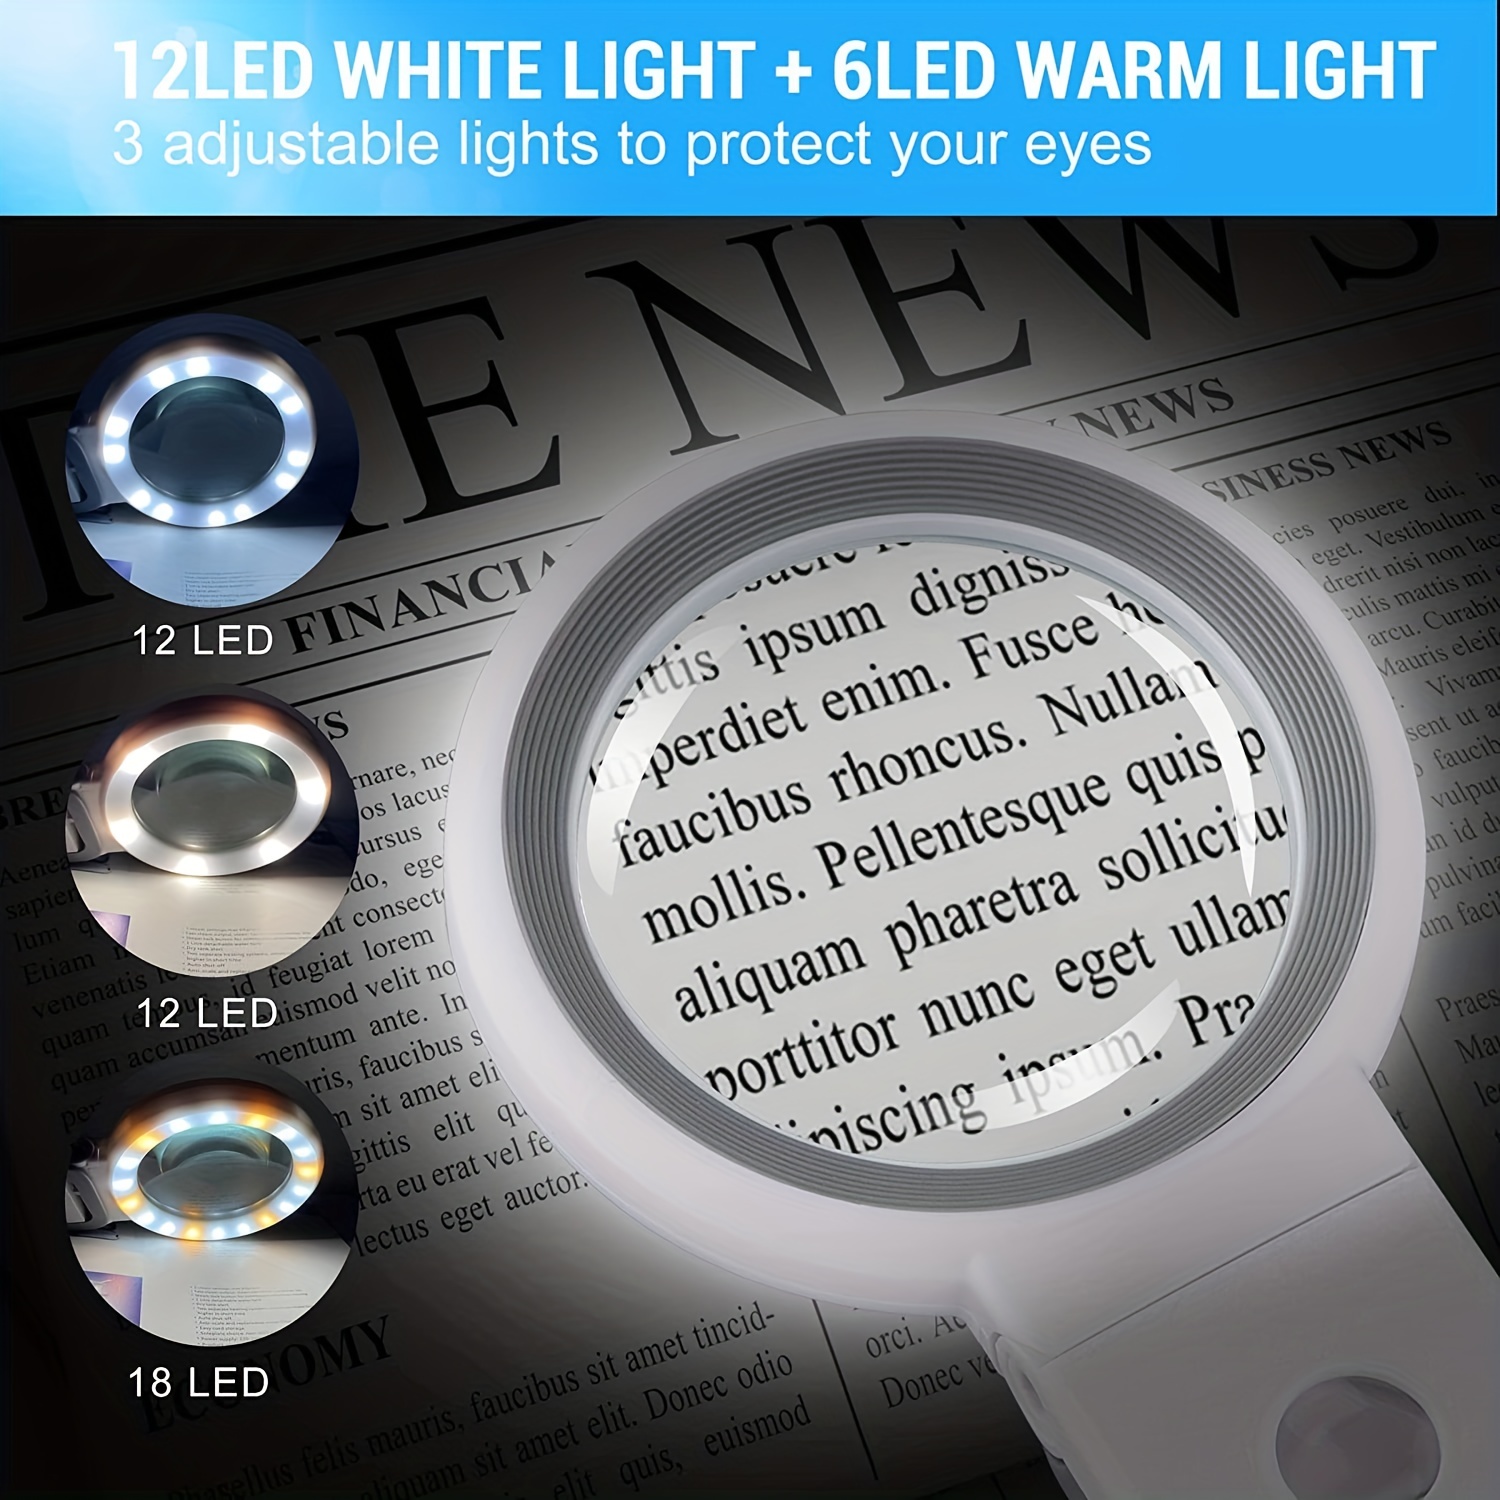 2-in-1 LED Lighted Magnifying Glass with Stand - 10X Italy